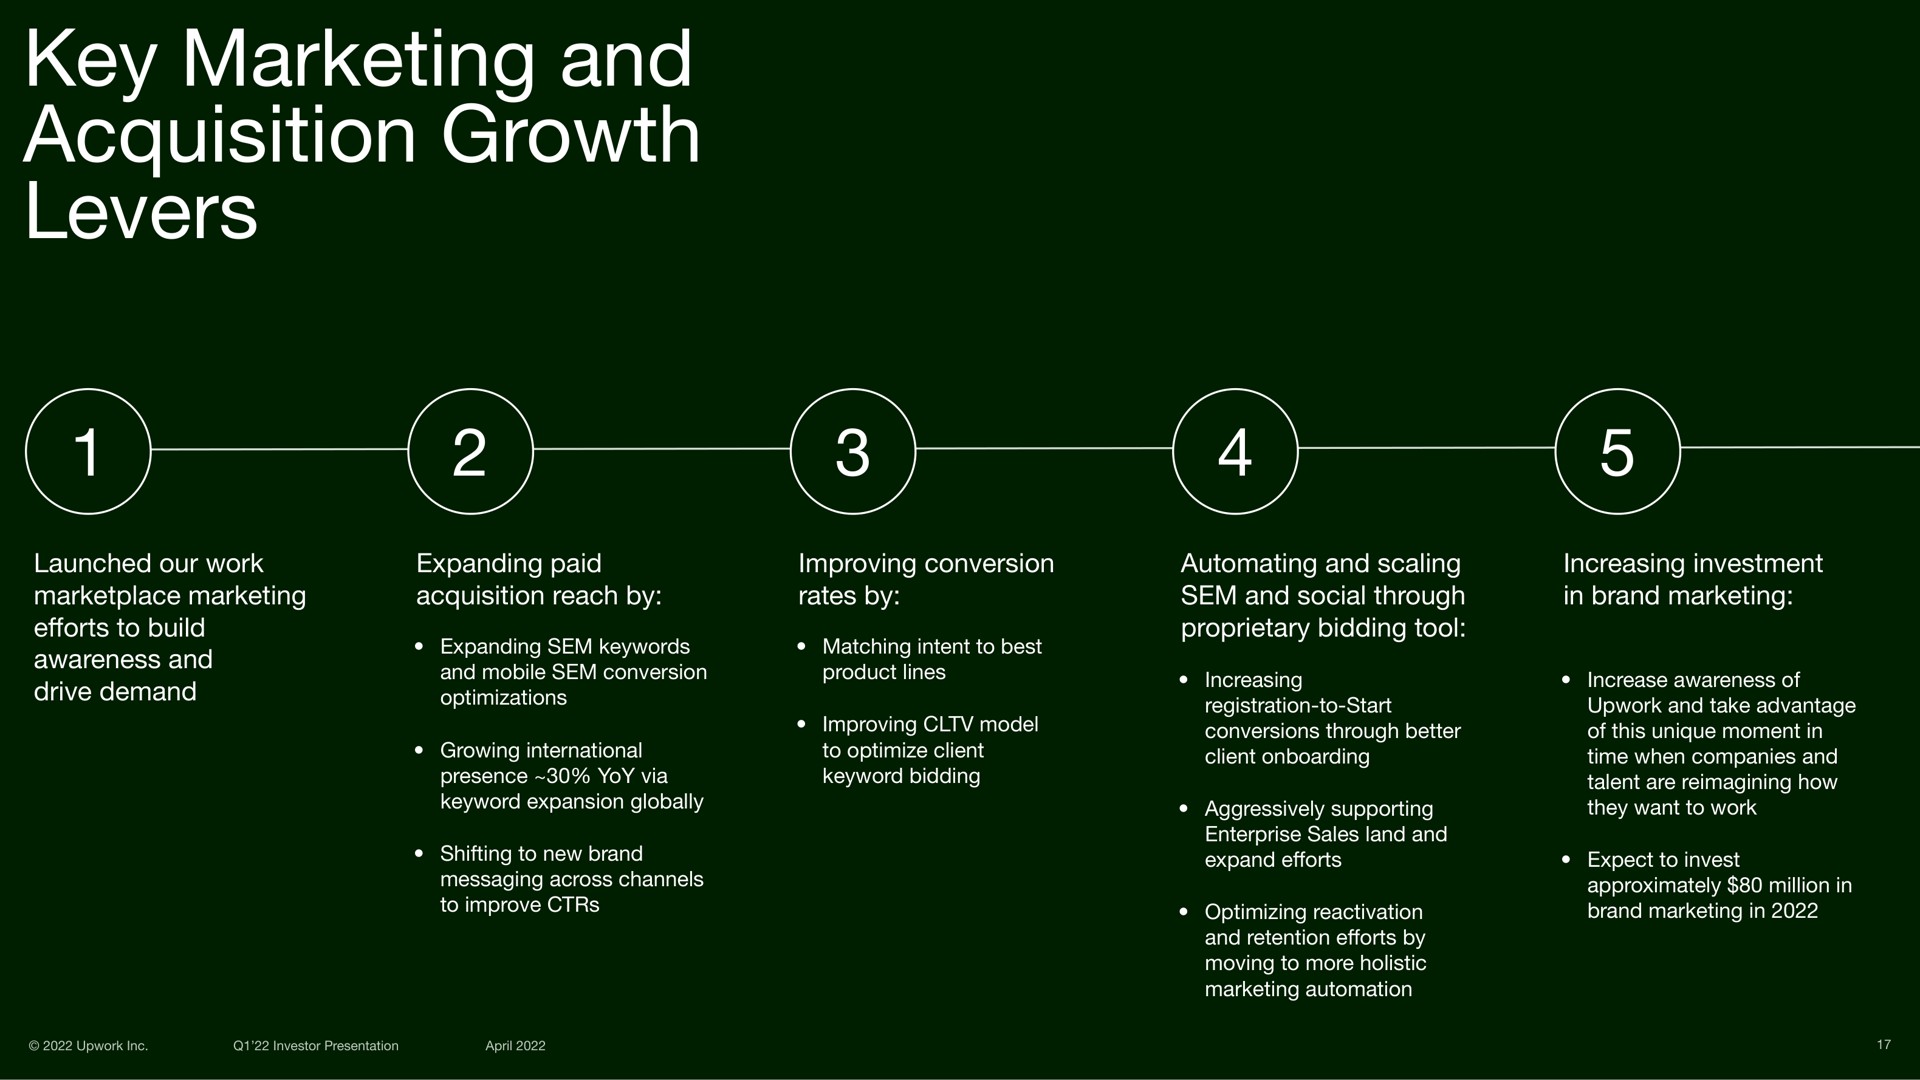 key marketing and acquisition growth levers | Upwork